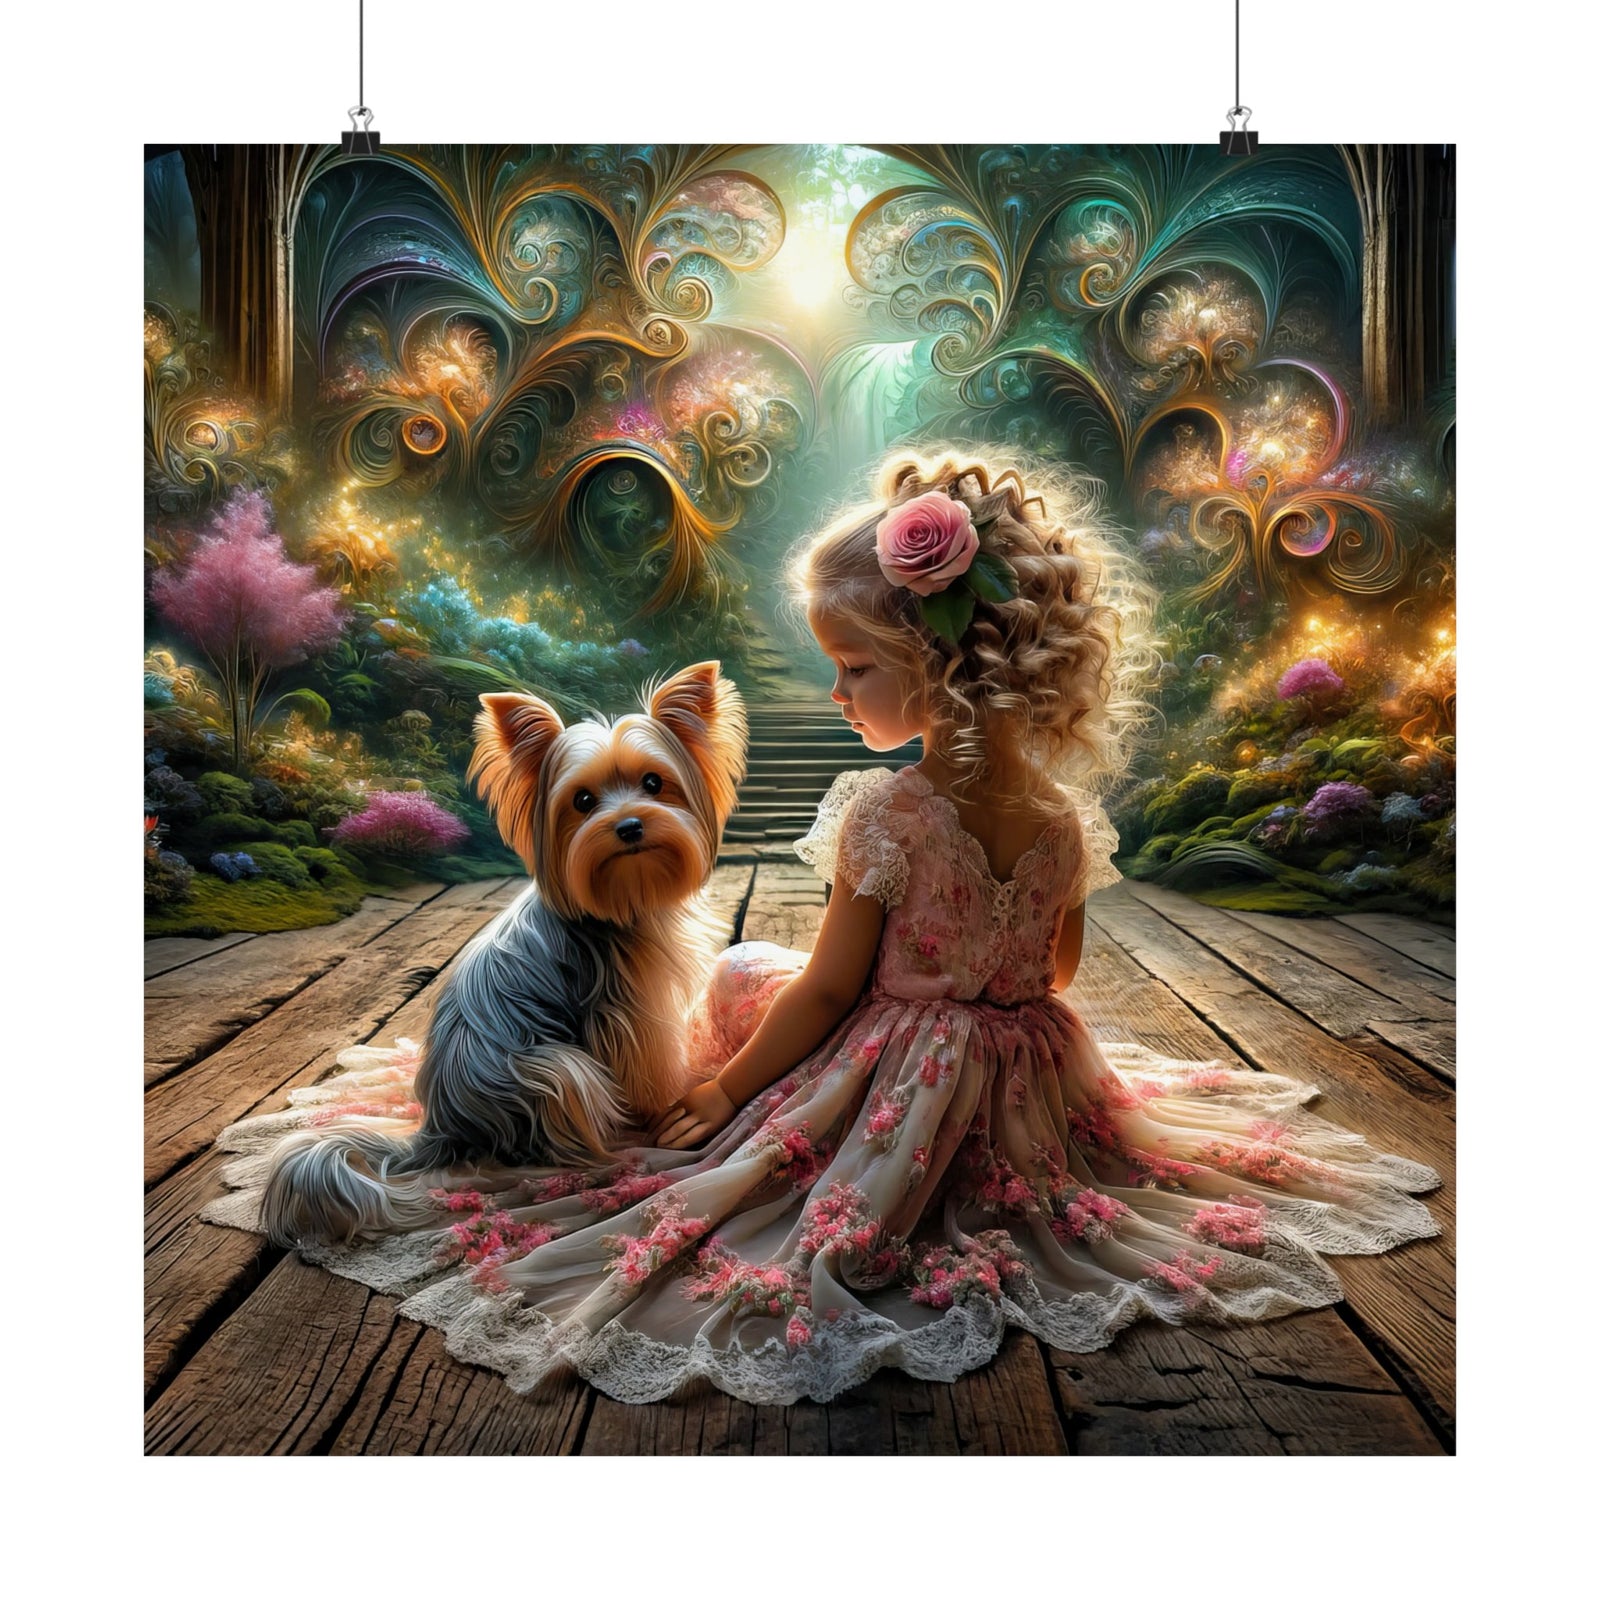 A Yorkie's Tale in the Enchanted Garden Poster